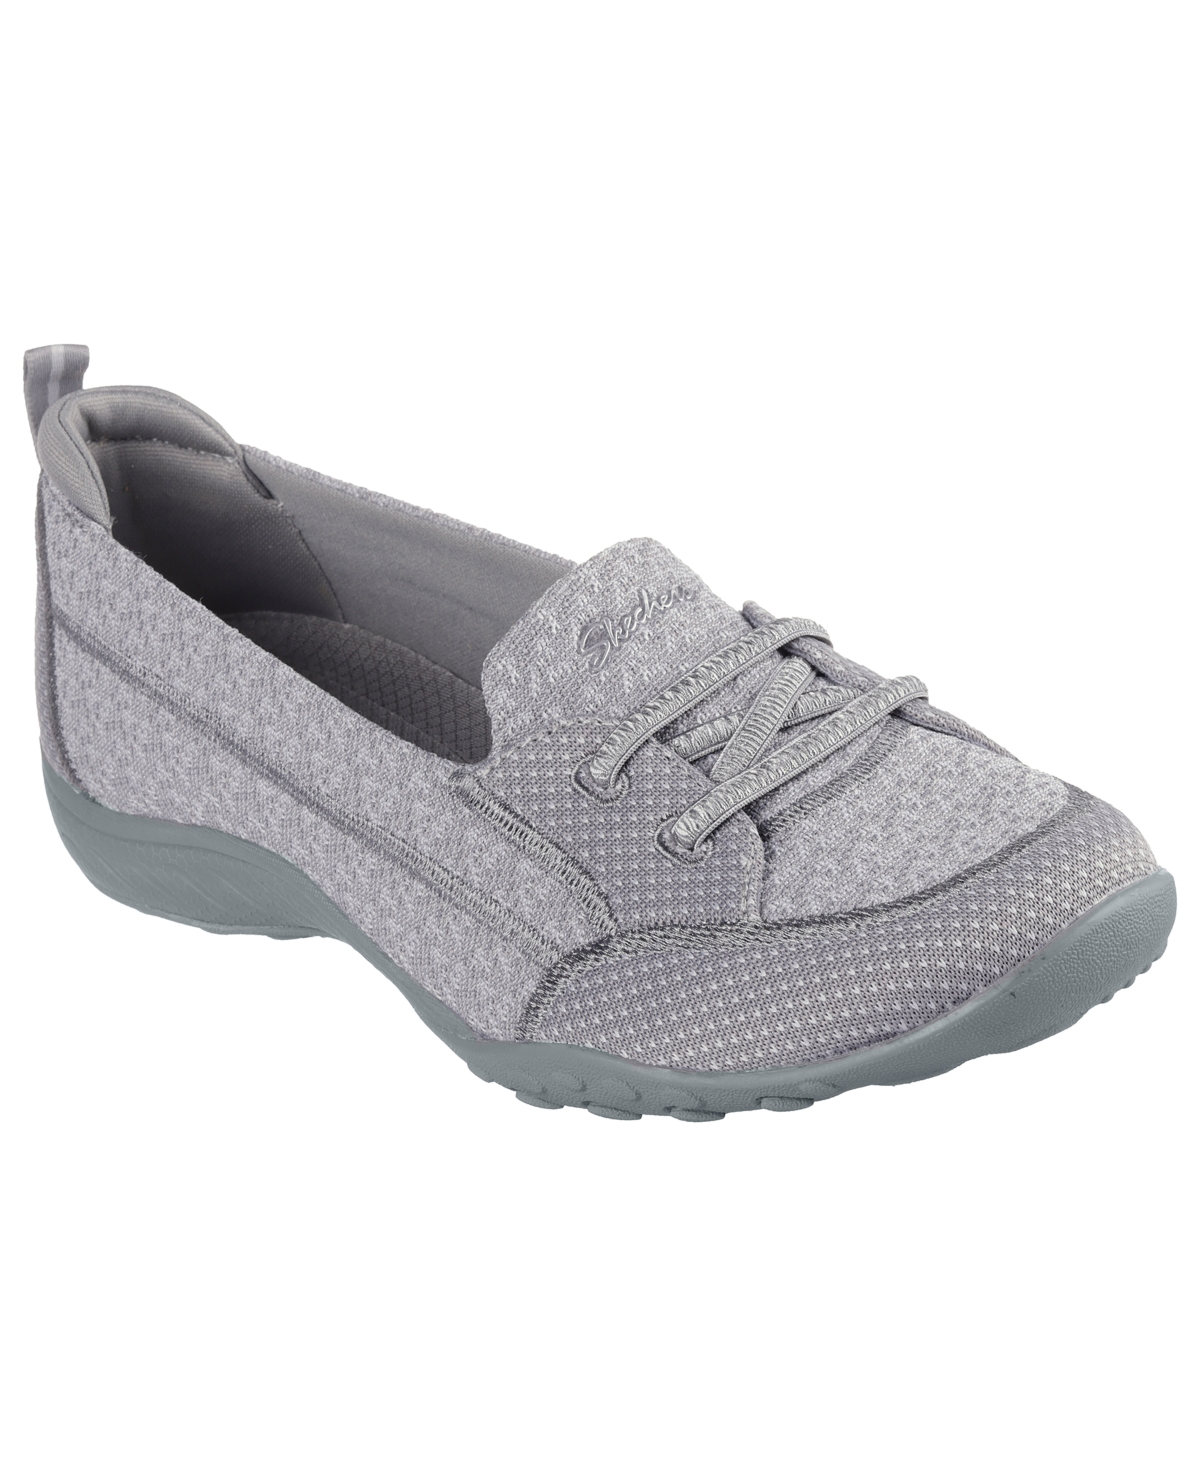 Women's Breathe Easy - Holding Slip-On Casual Sneakers from Finish Line - Gray